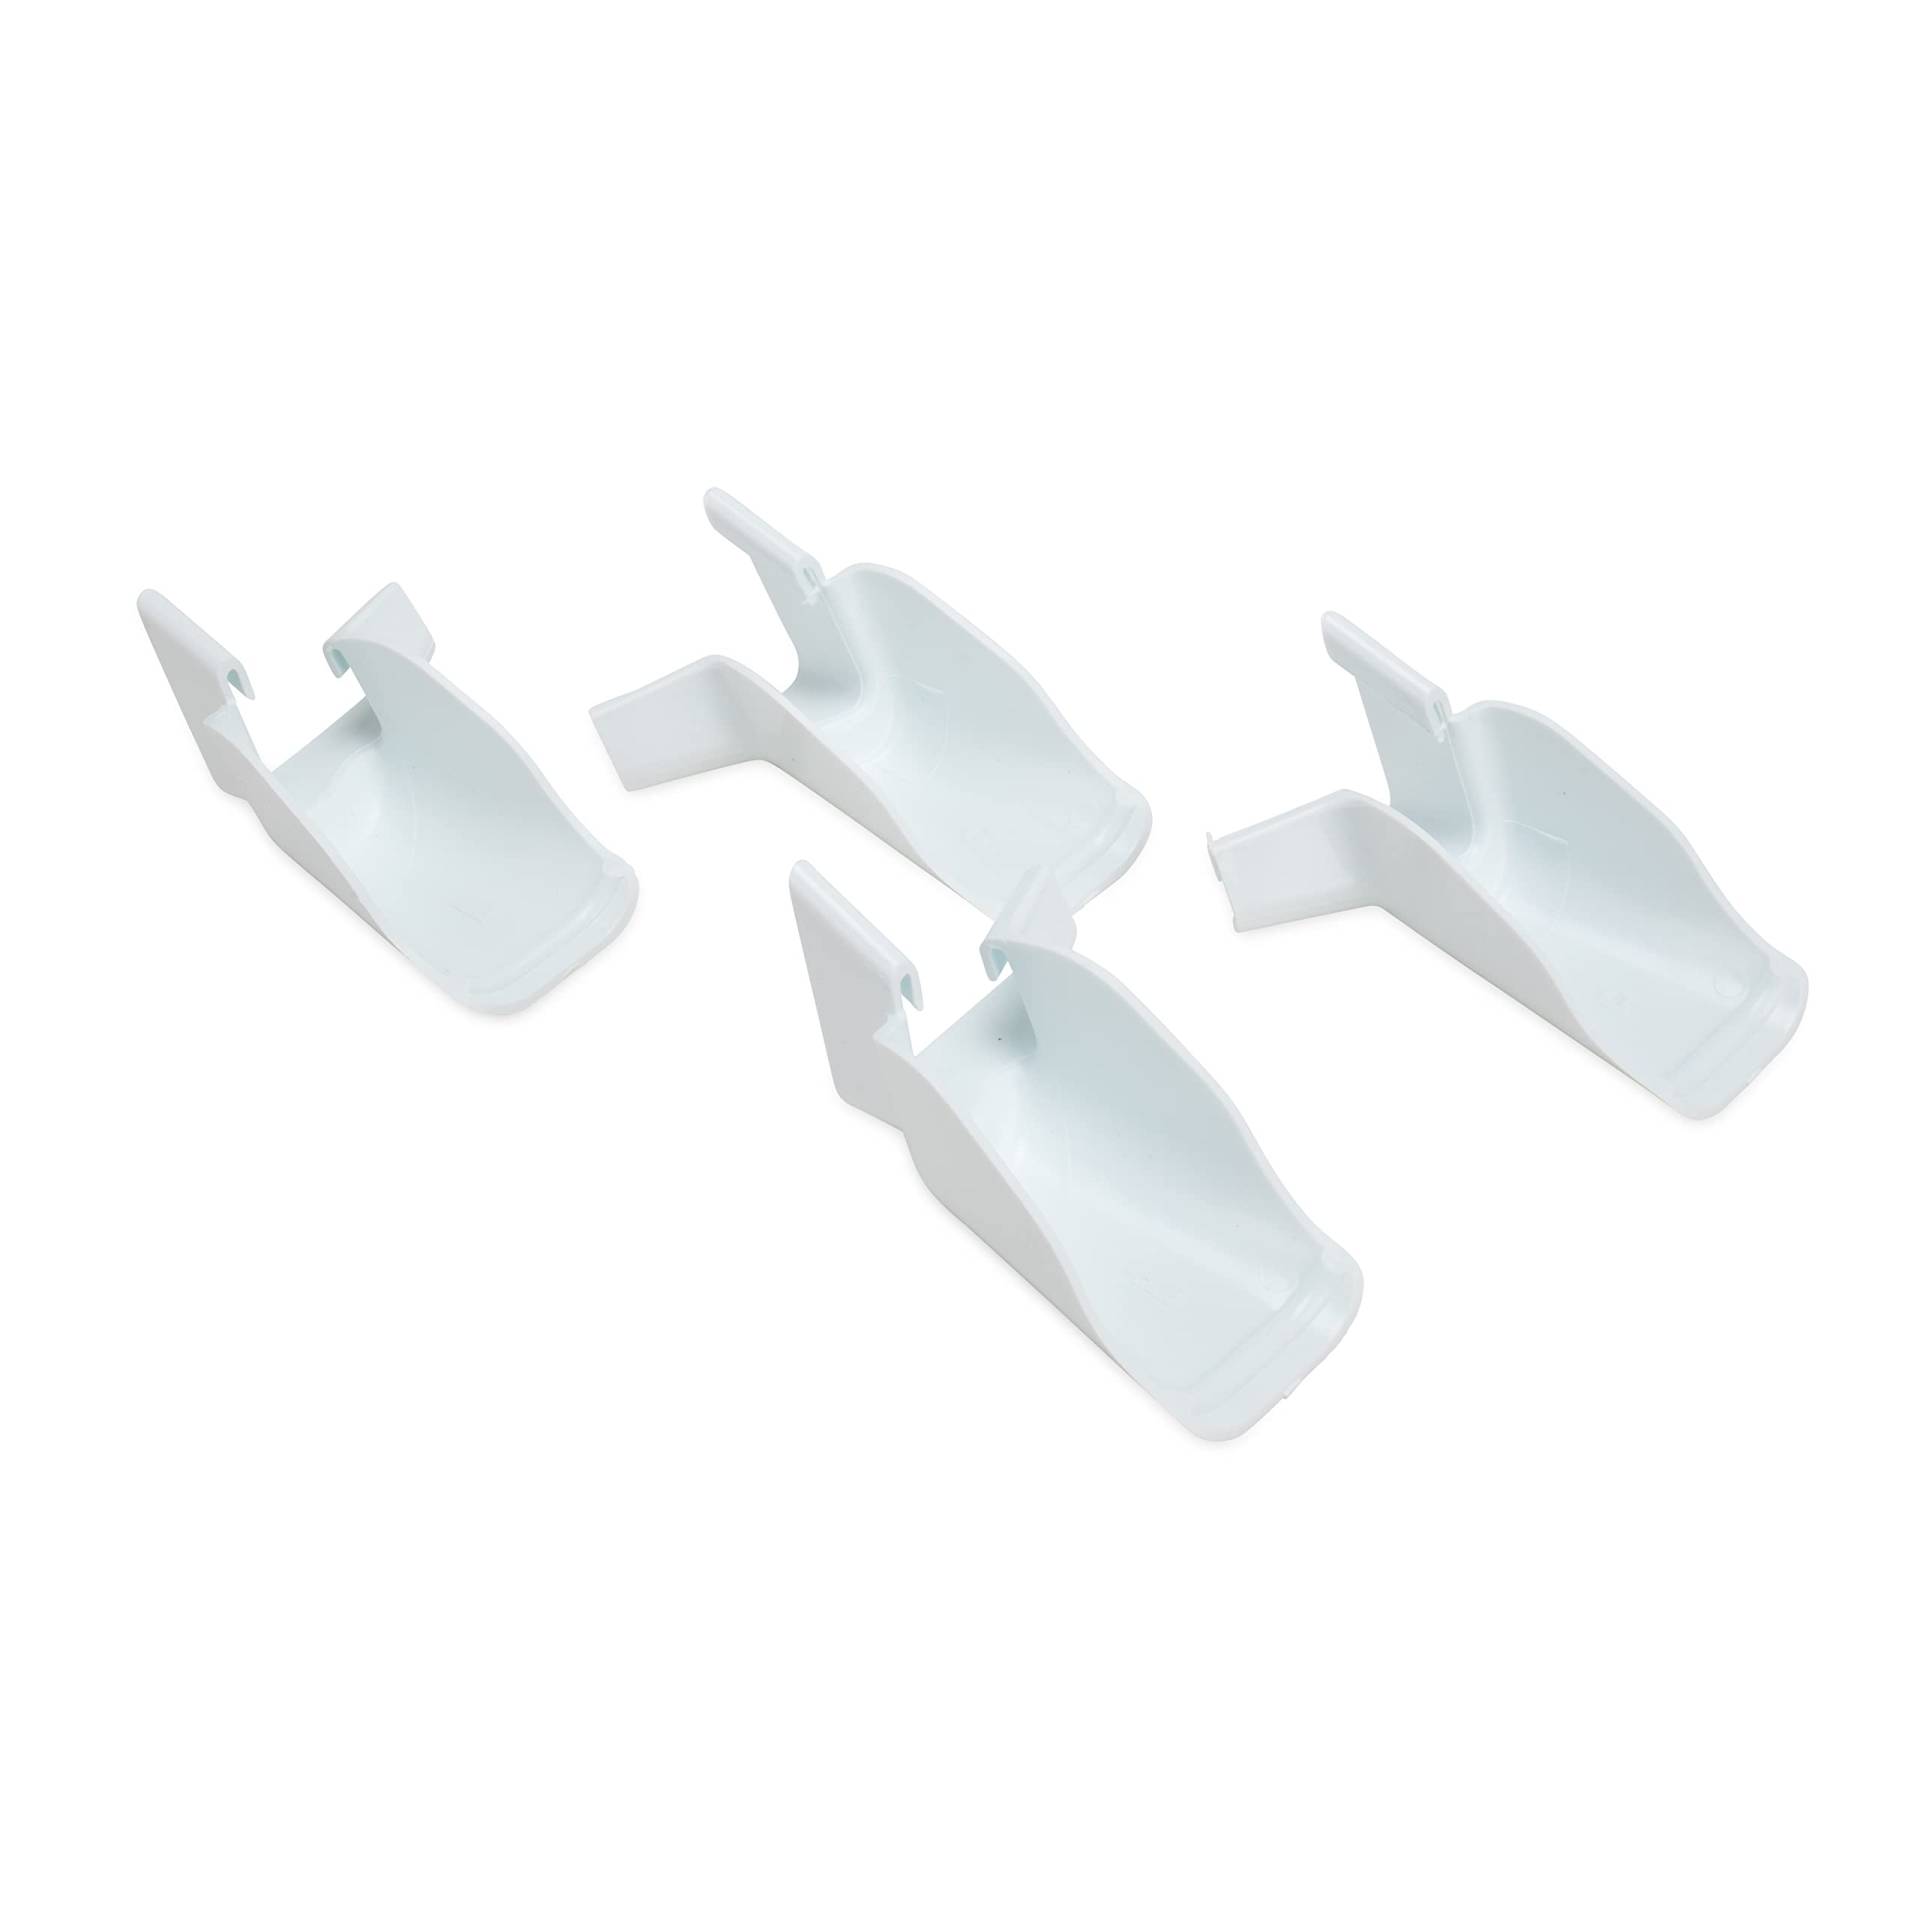 Camco 42123 Gutter Extensions - Pack of 4,White von Camco